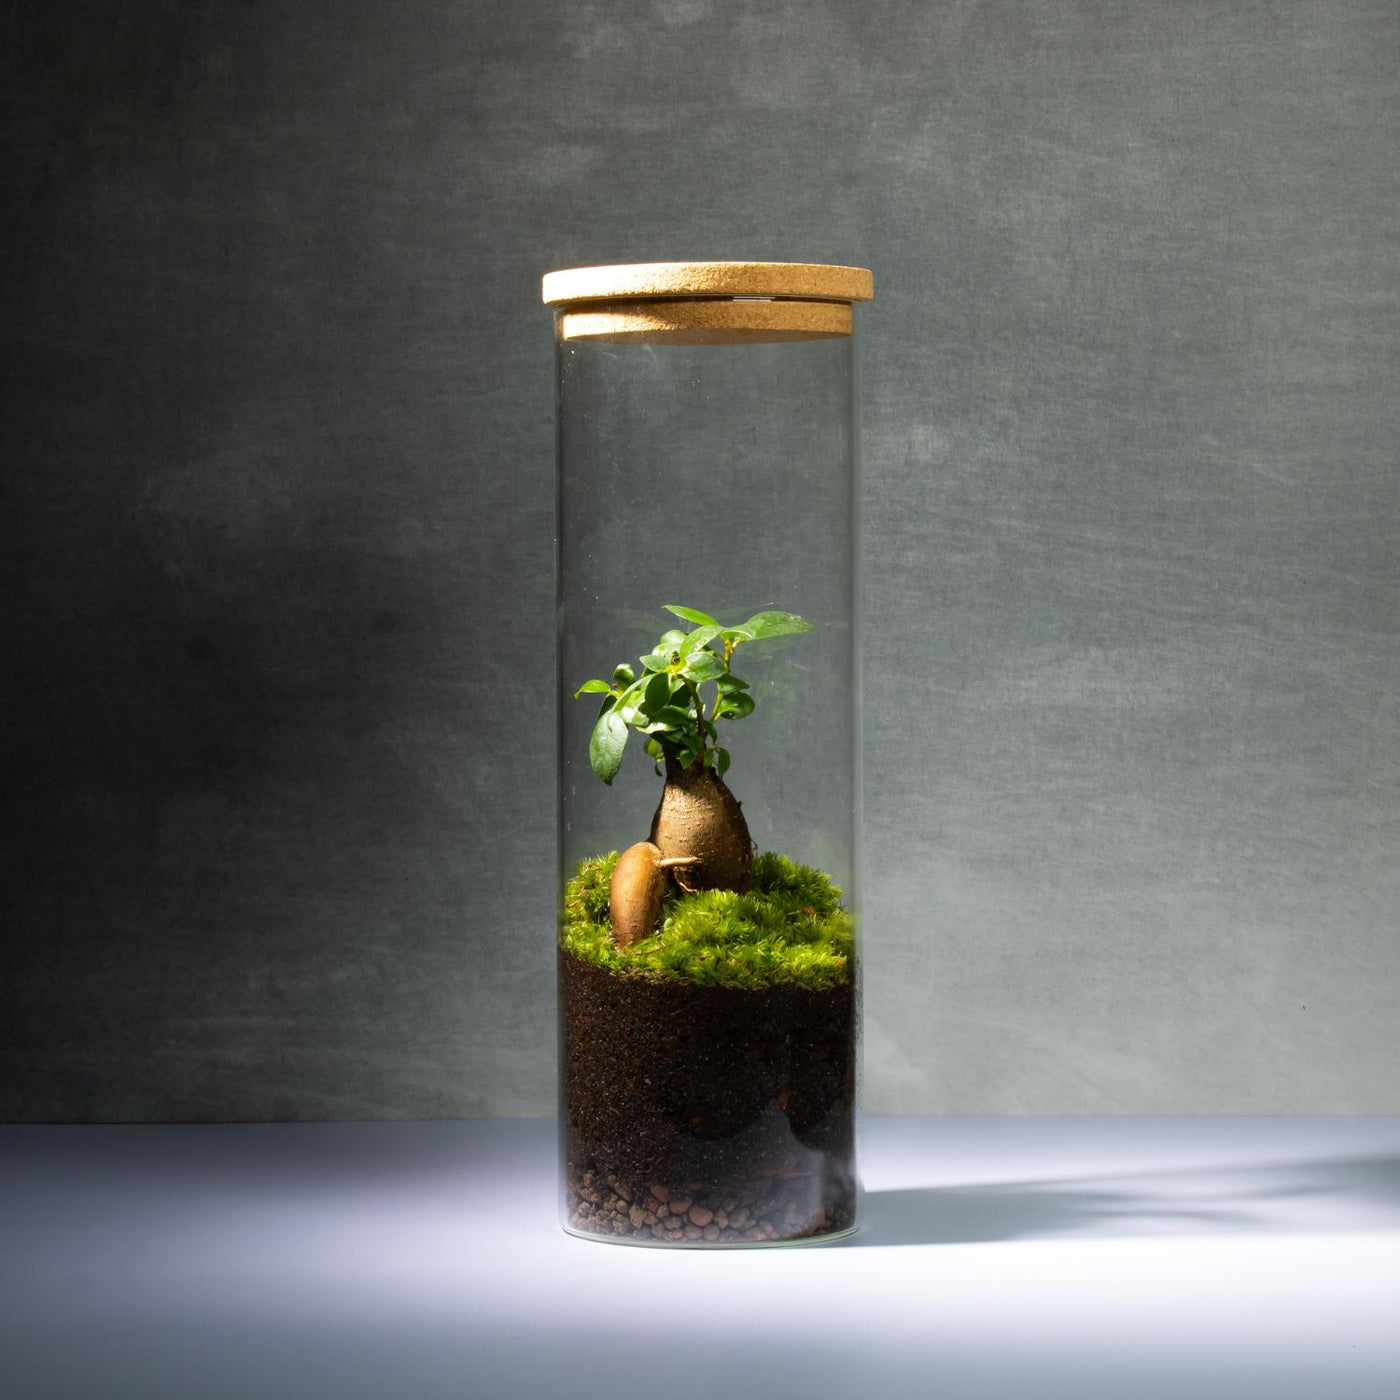 Shop All Terrariums Readymade For Sale | ome